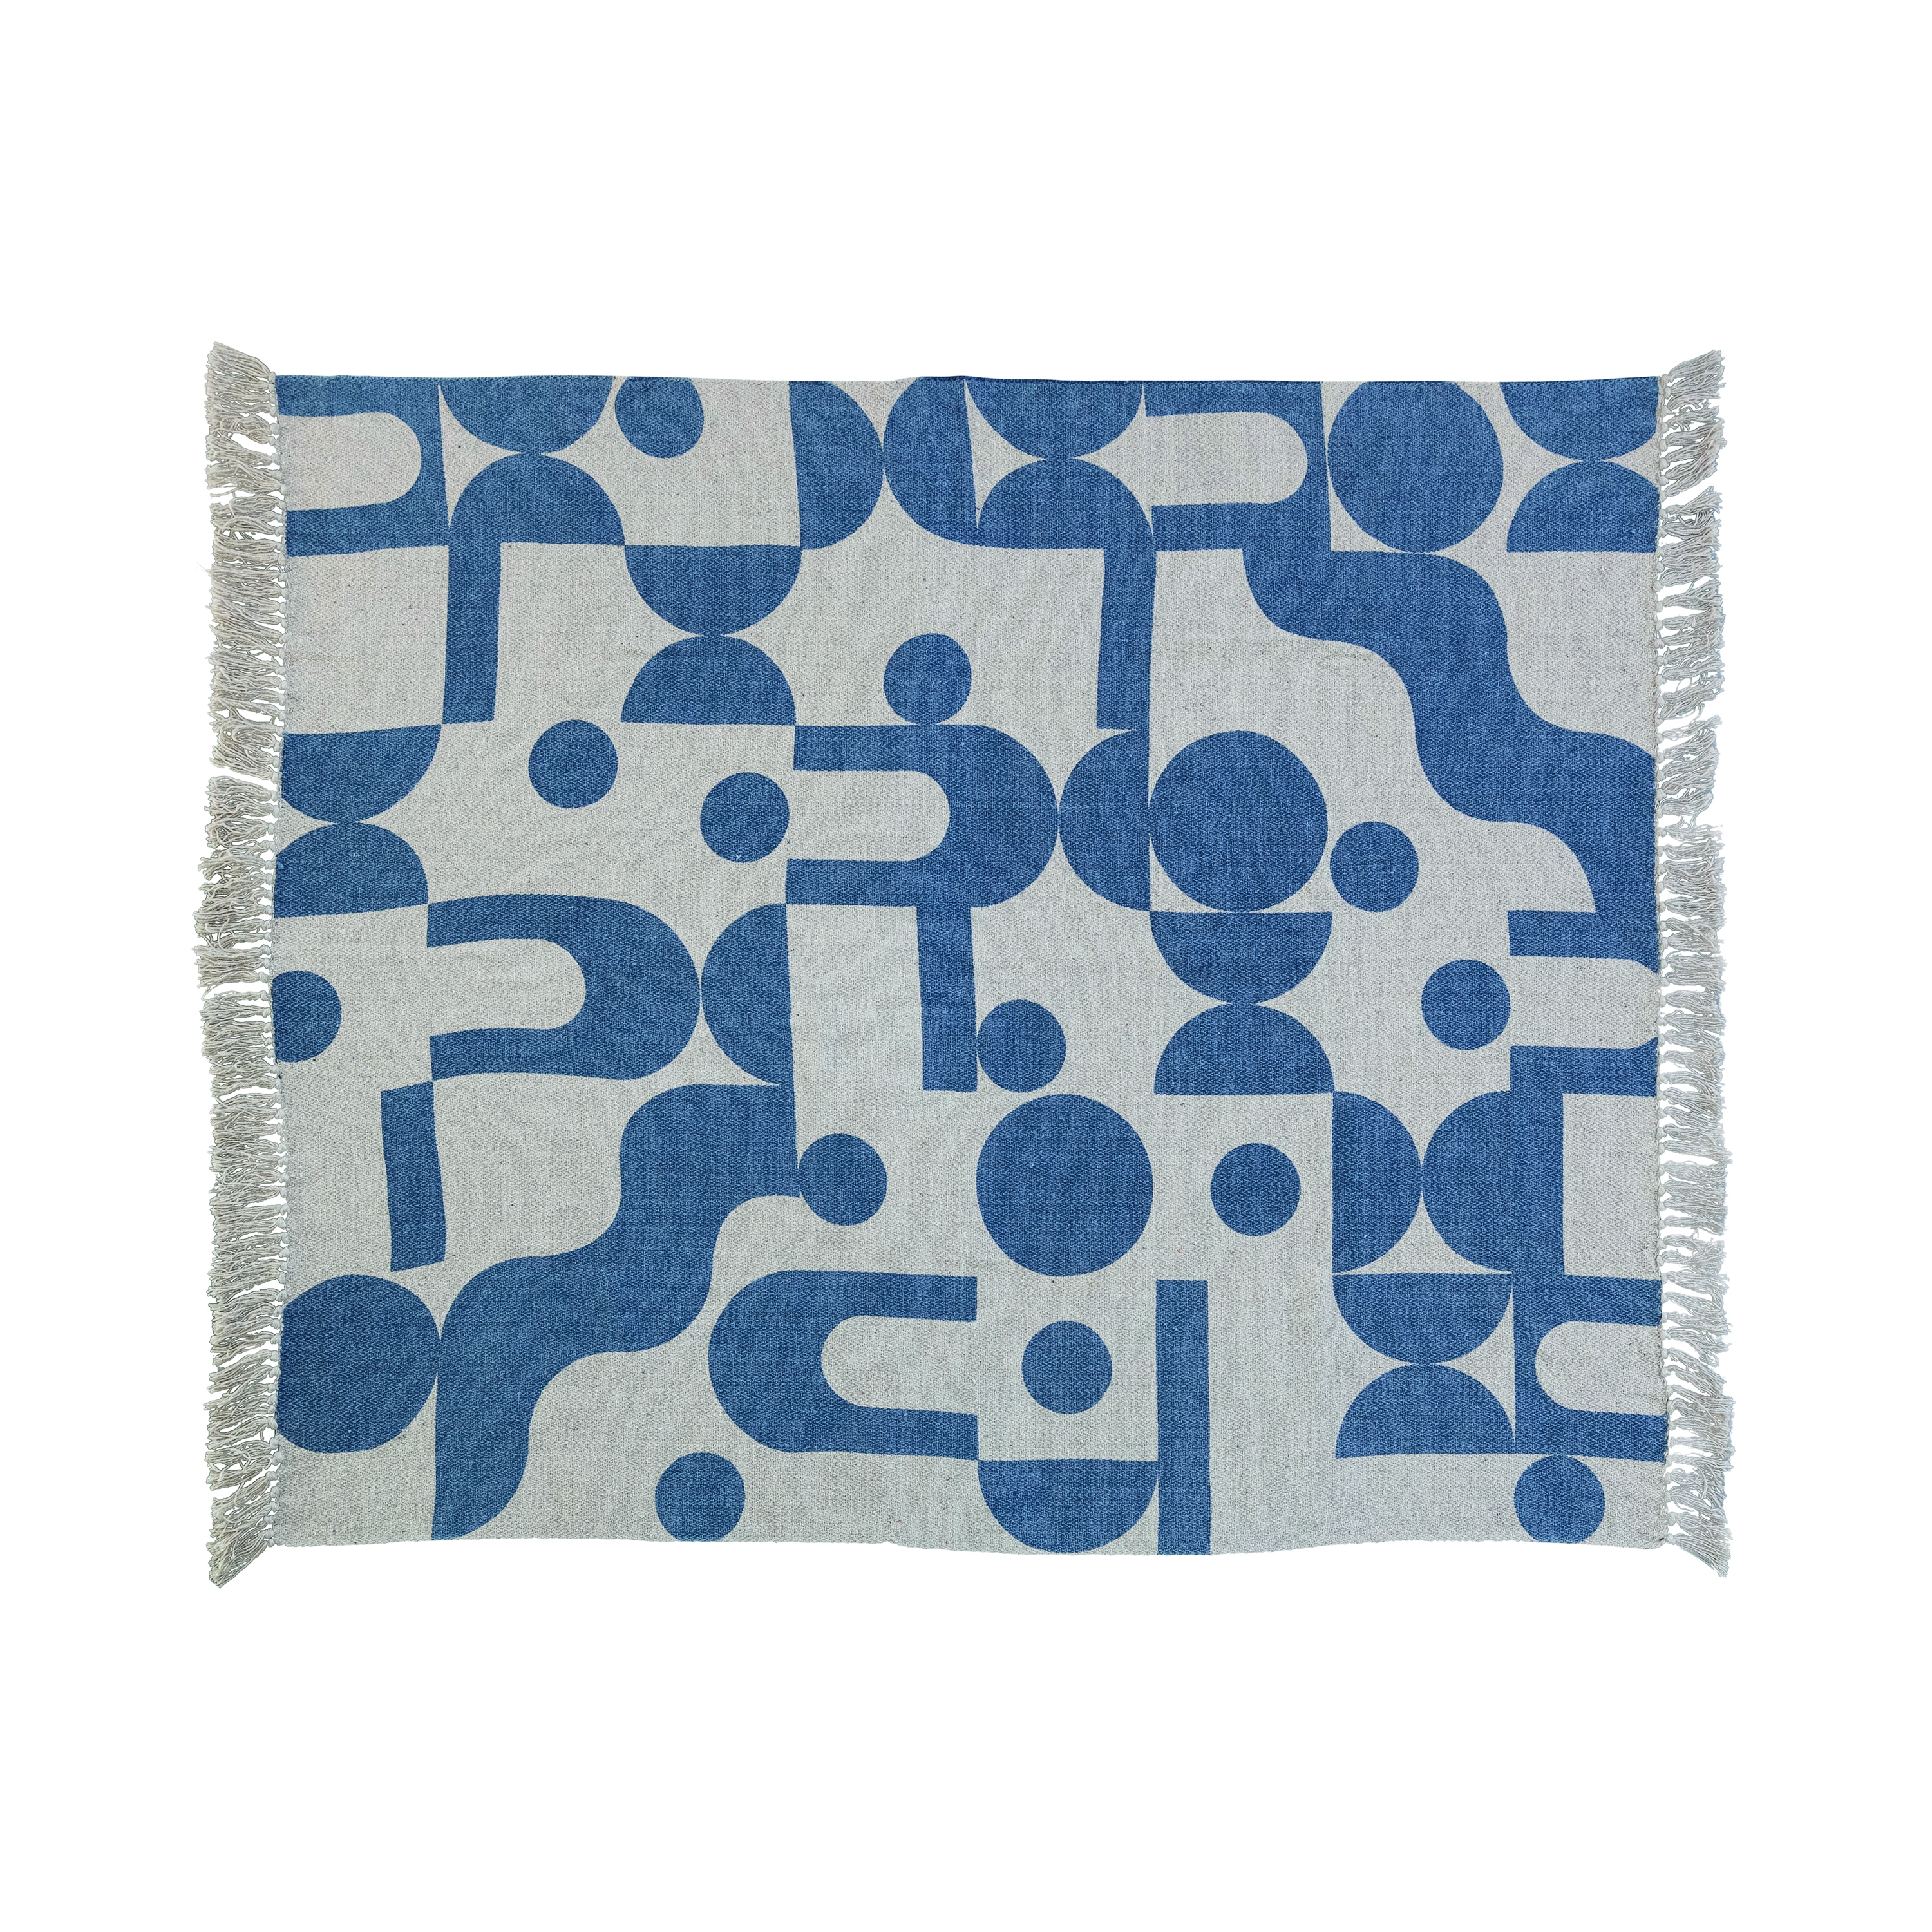 Woven Reclaimed Cotton Blend Printed Throw Sheet with Abstract Design and Fringe, Blue and Beige - Image 0